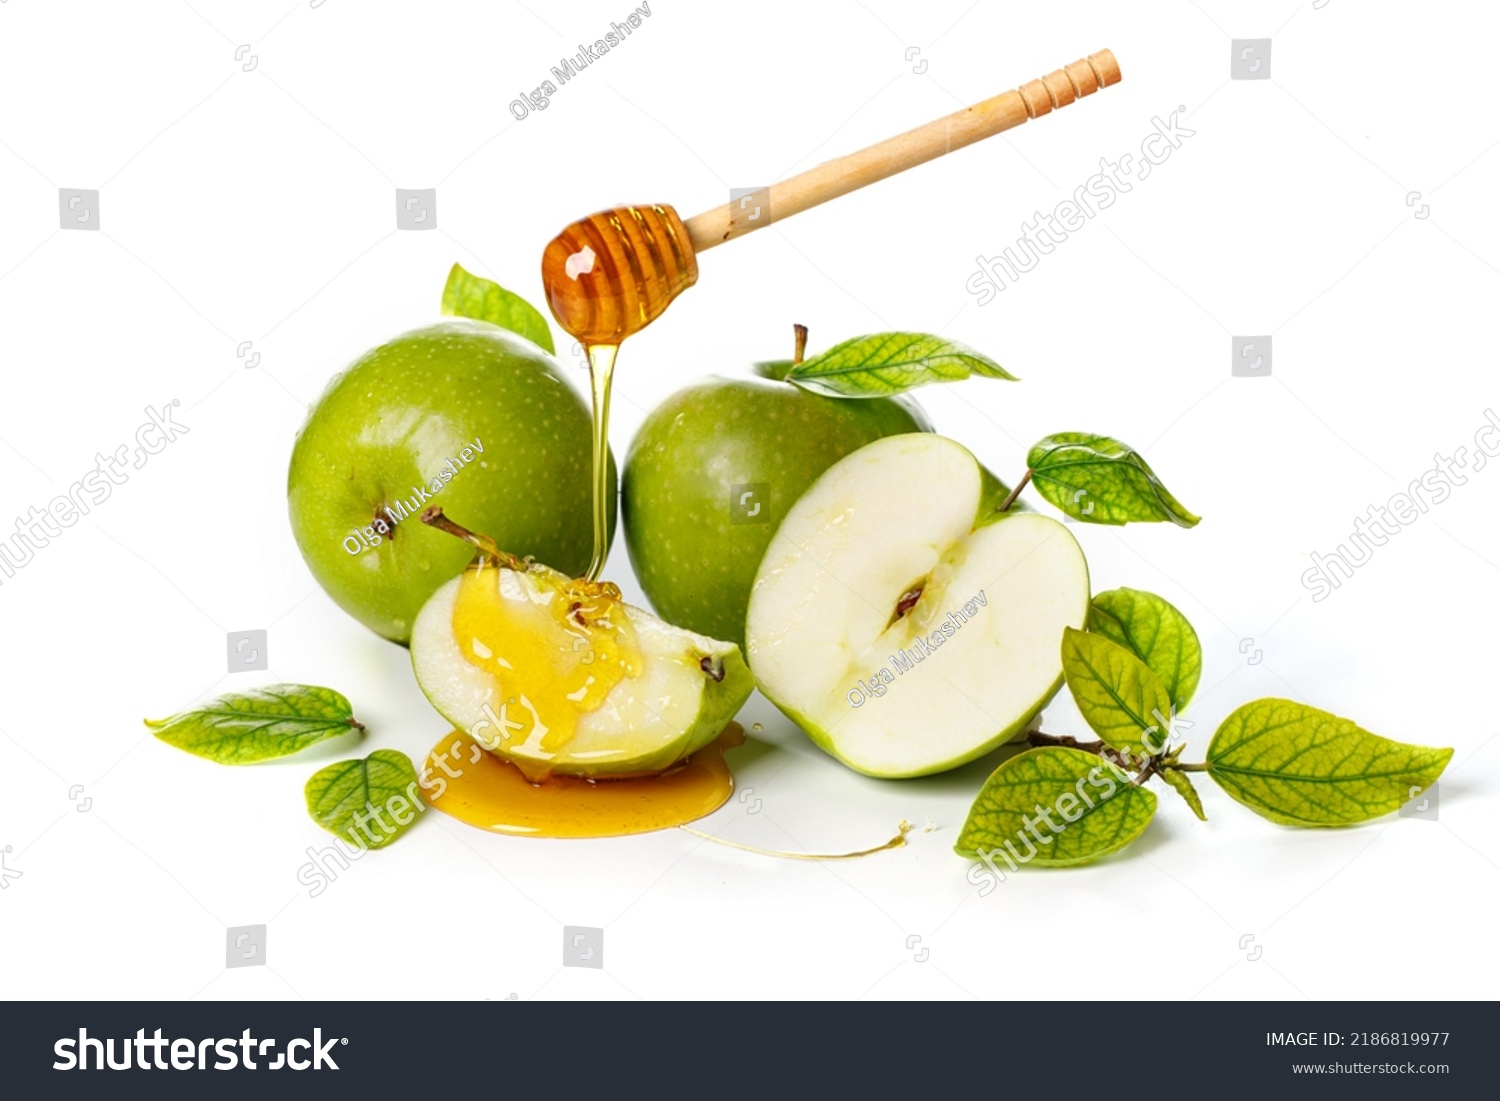 Honey dripping from wooden stick on green apples. White background. Rosh Hashanah (Jewish New Year holiday) concept. #2186819977